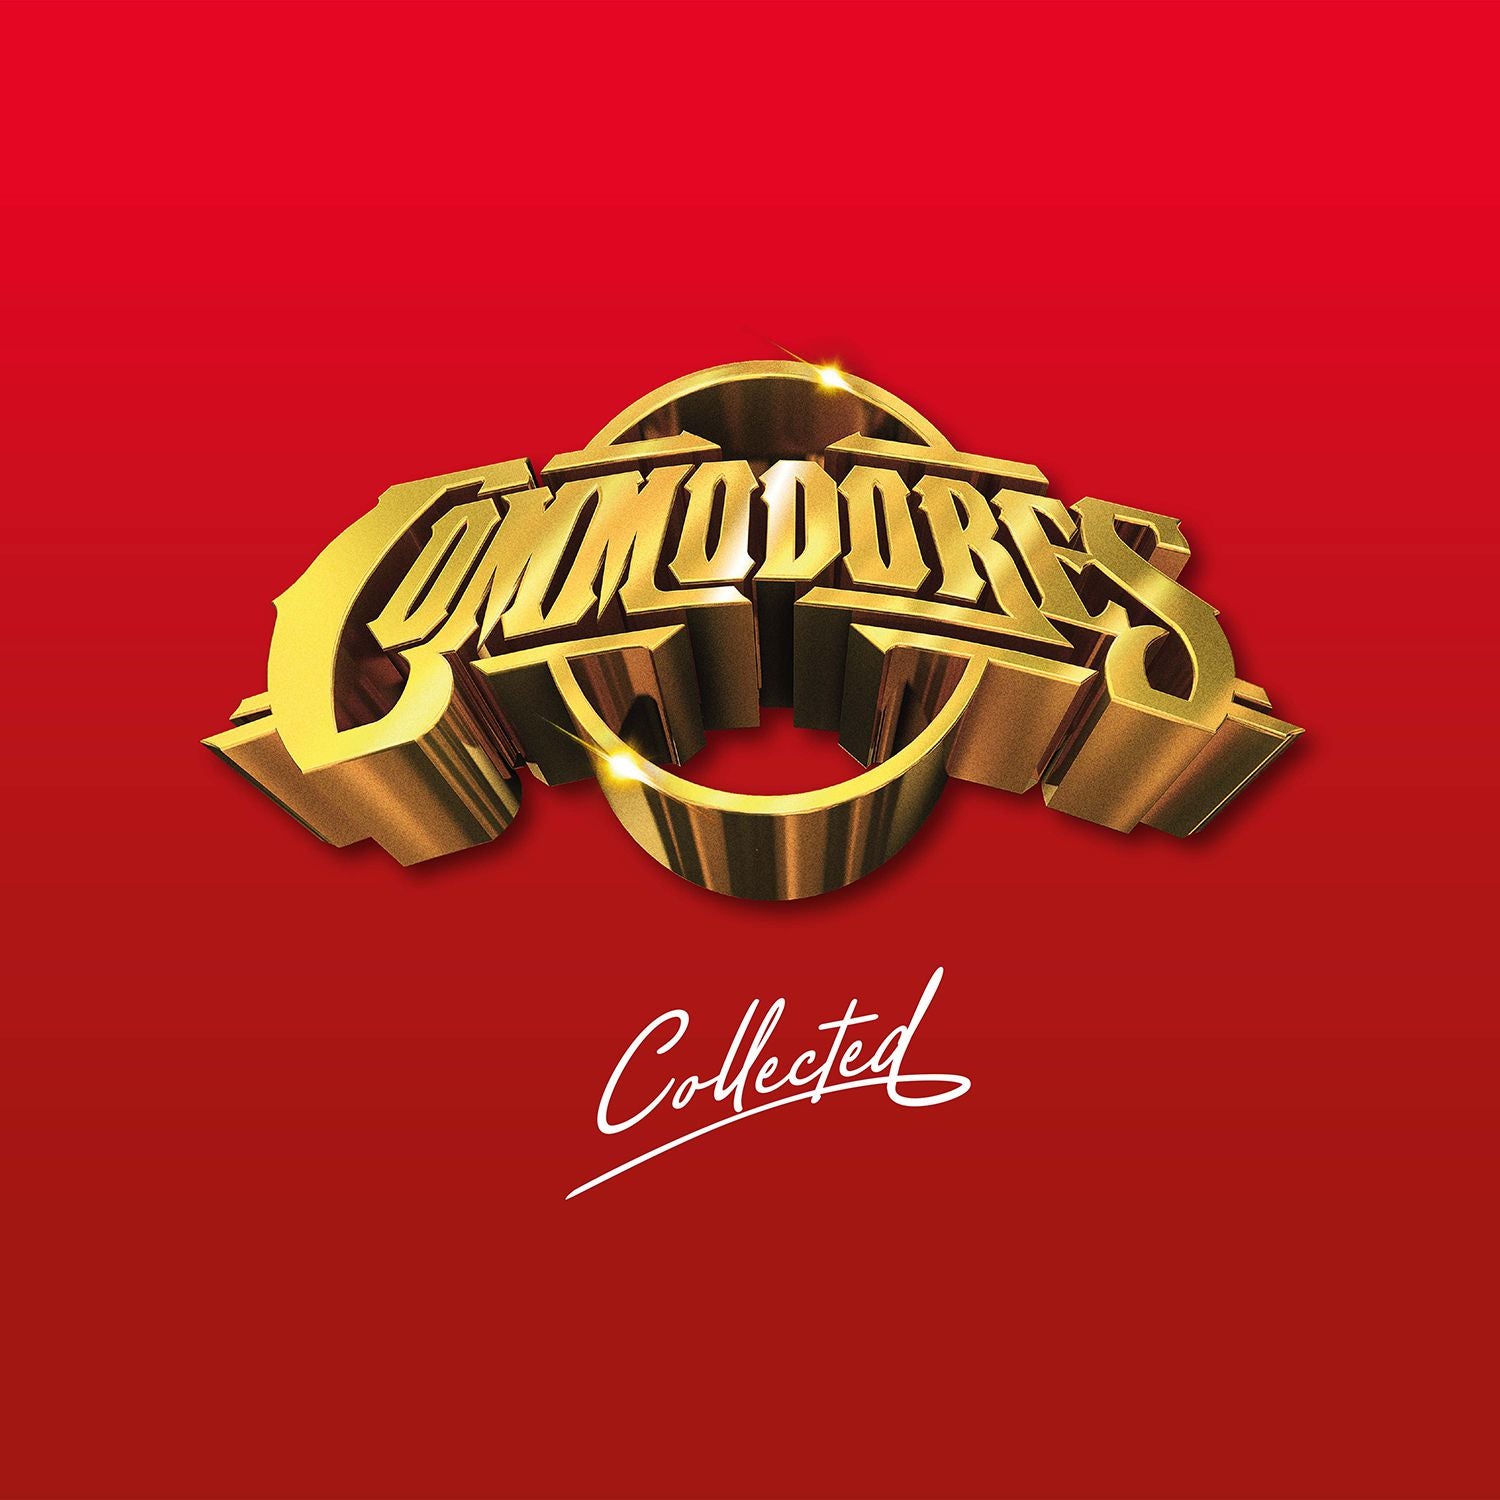 Commodores - Collected 2LP (Music On Vinyl, 180g, Audiophile)